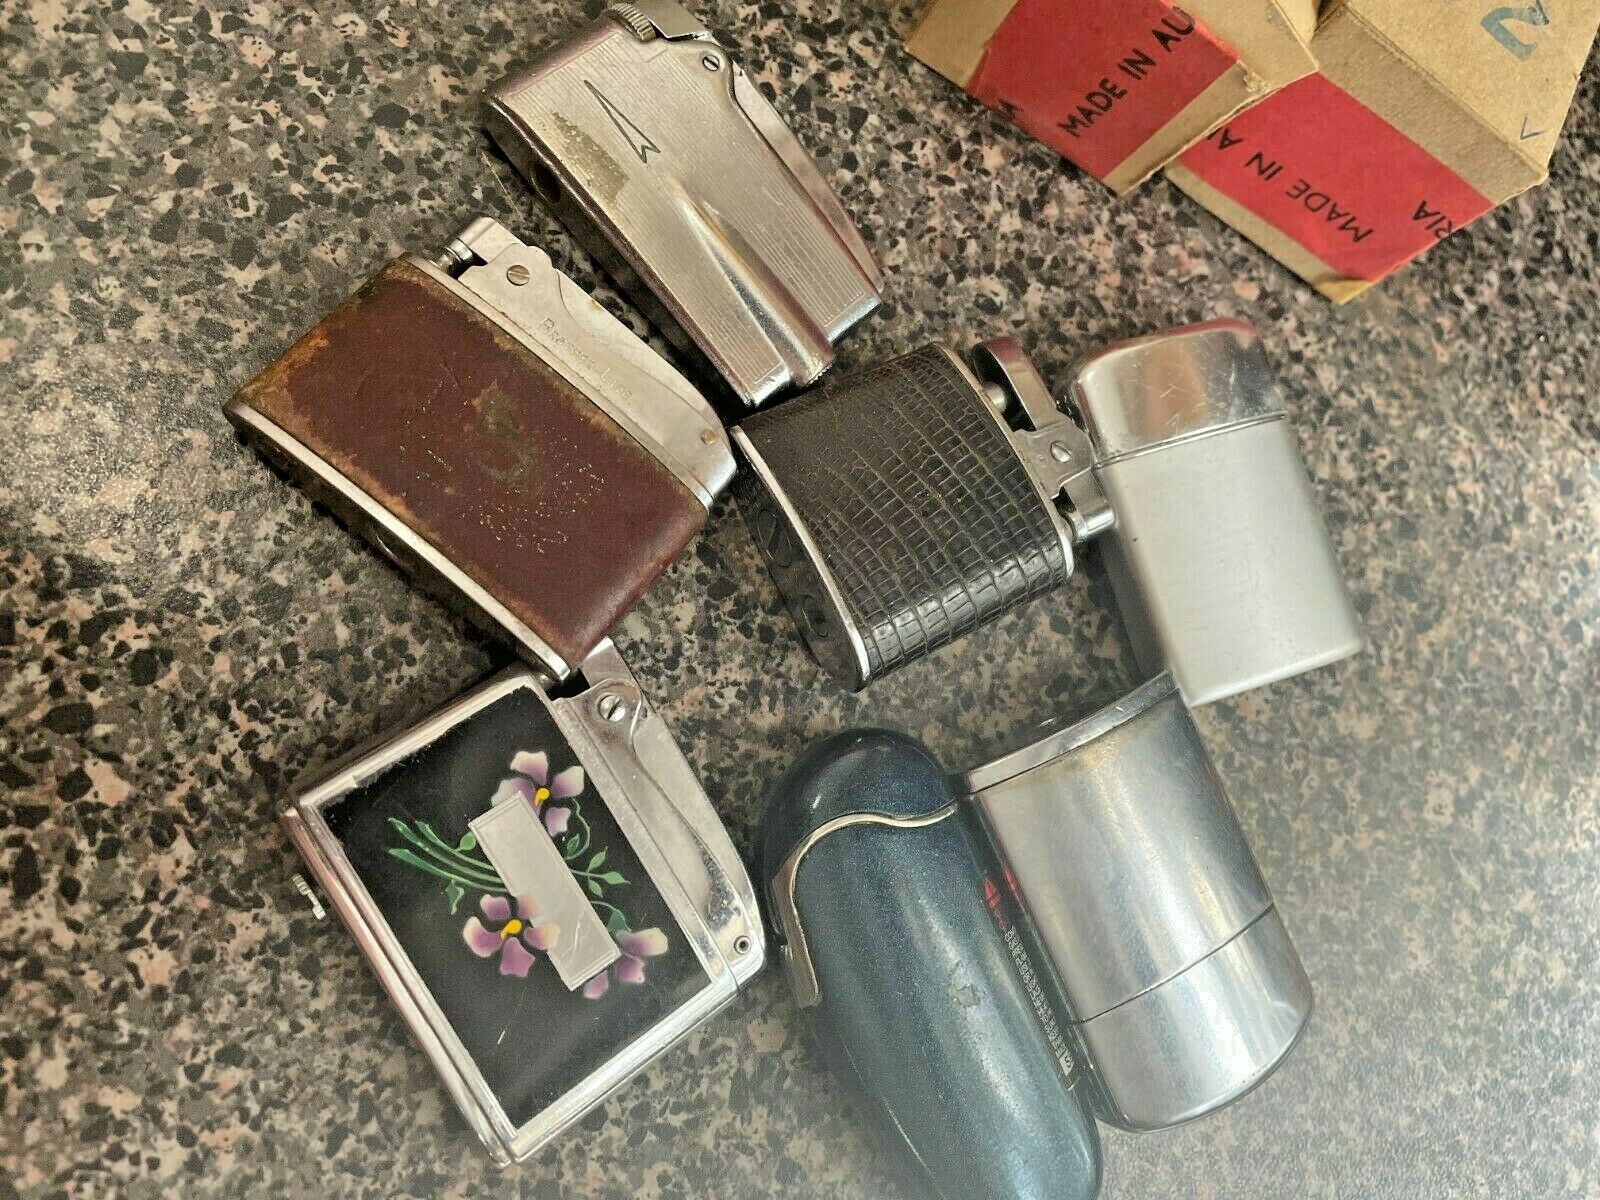 5 Ronson Lighter One Brother And 2 More As Found 7 Total